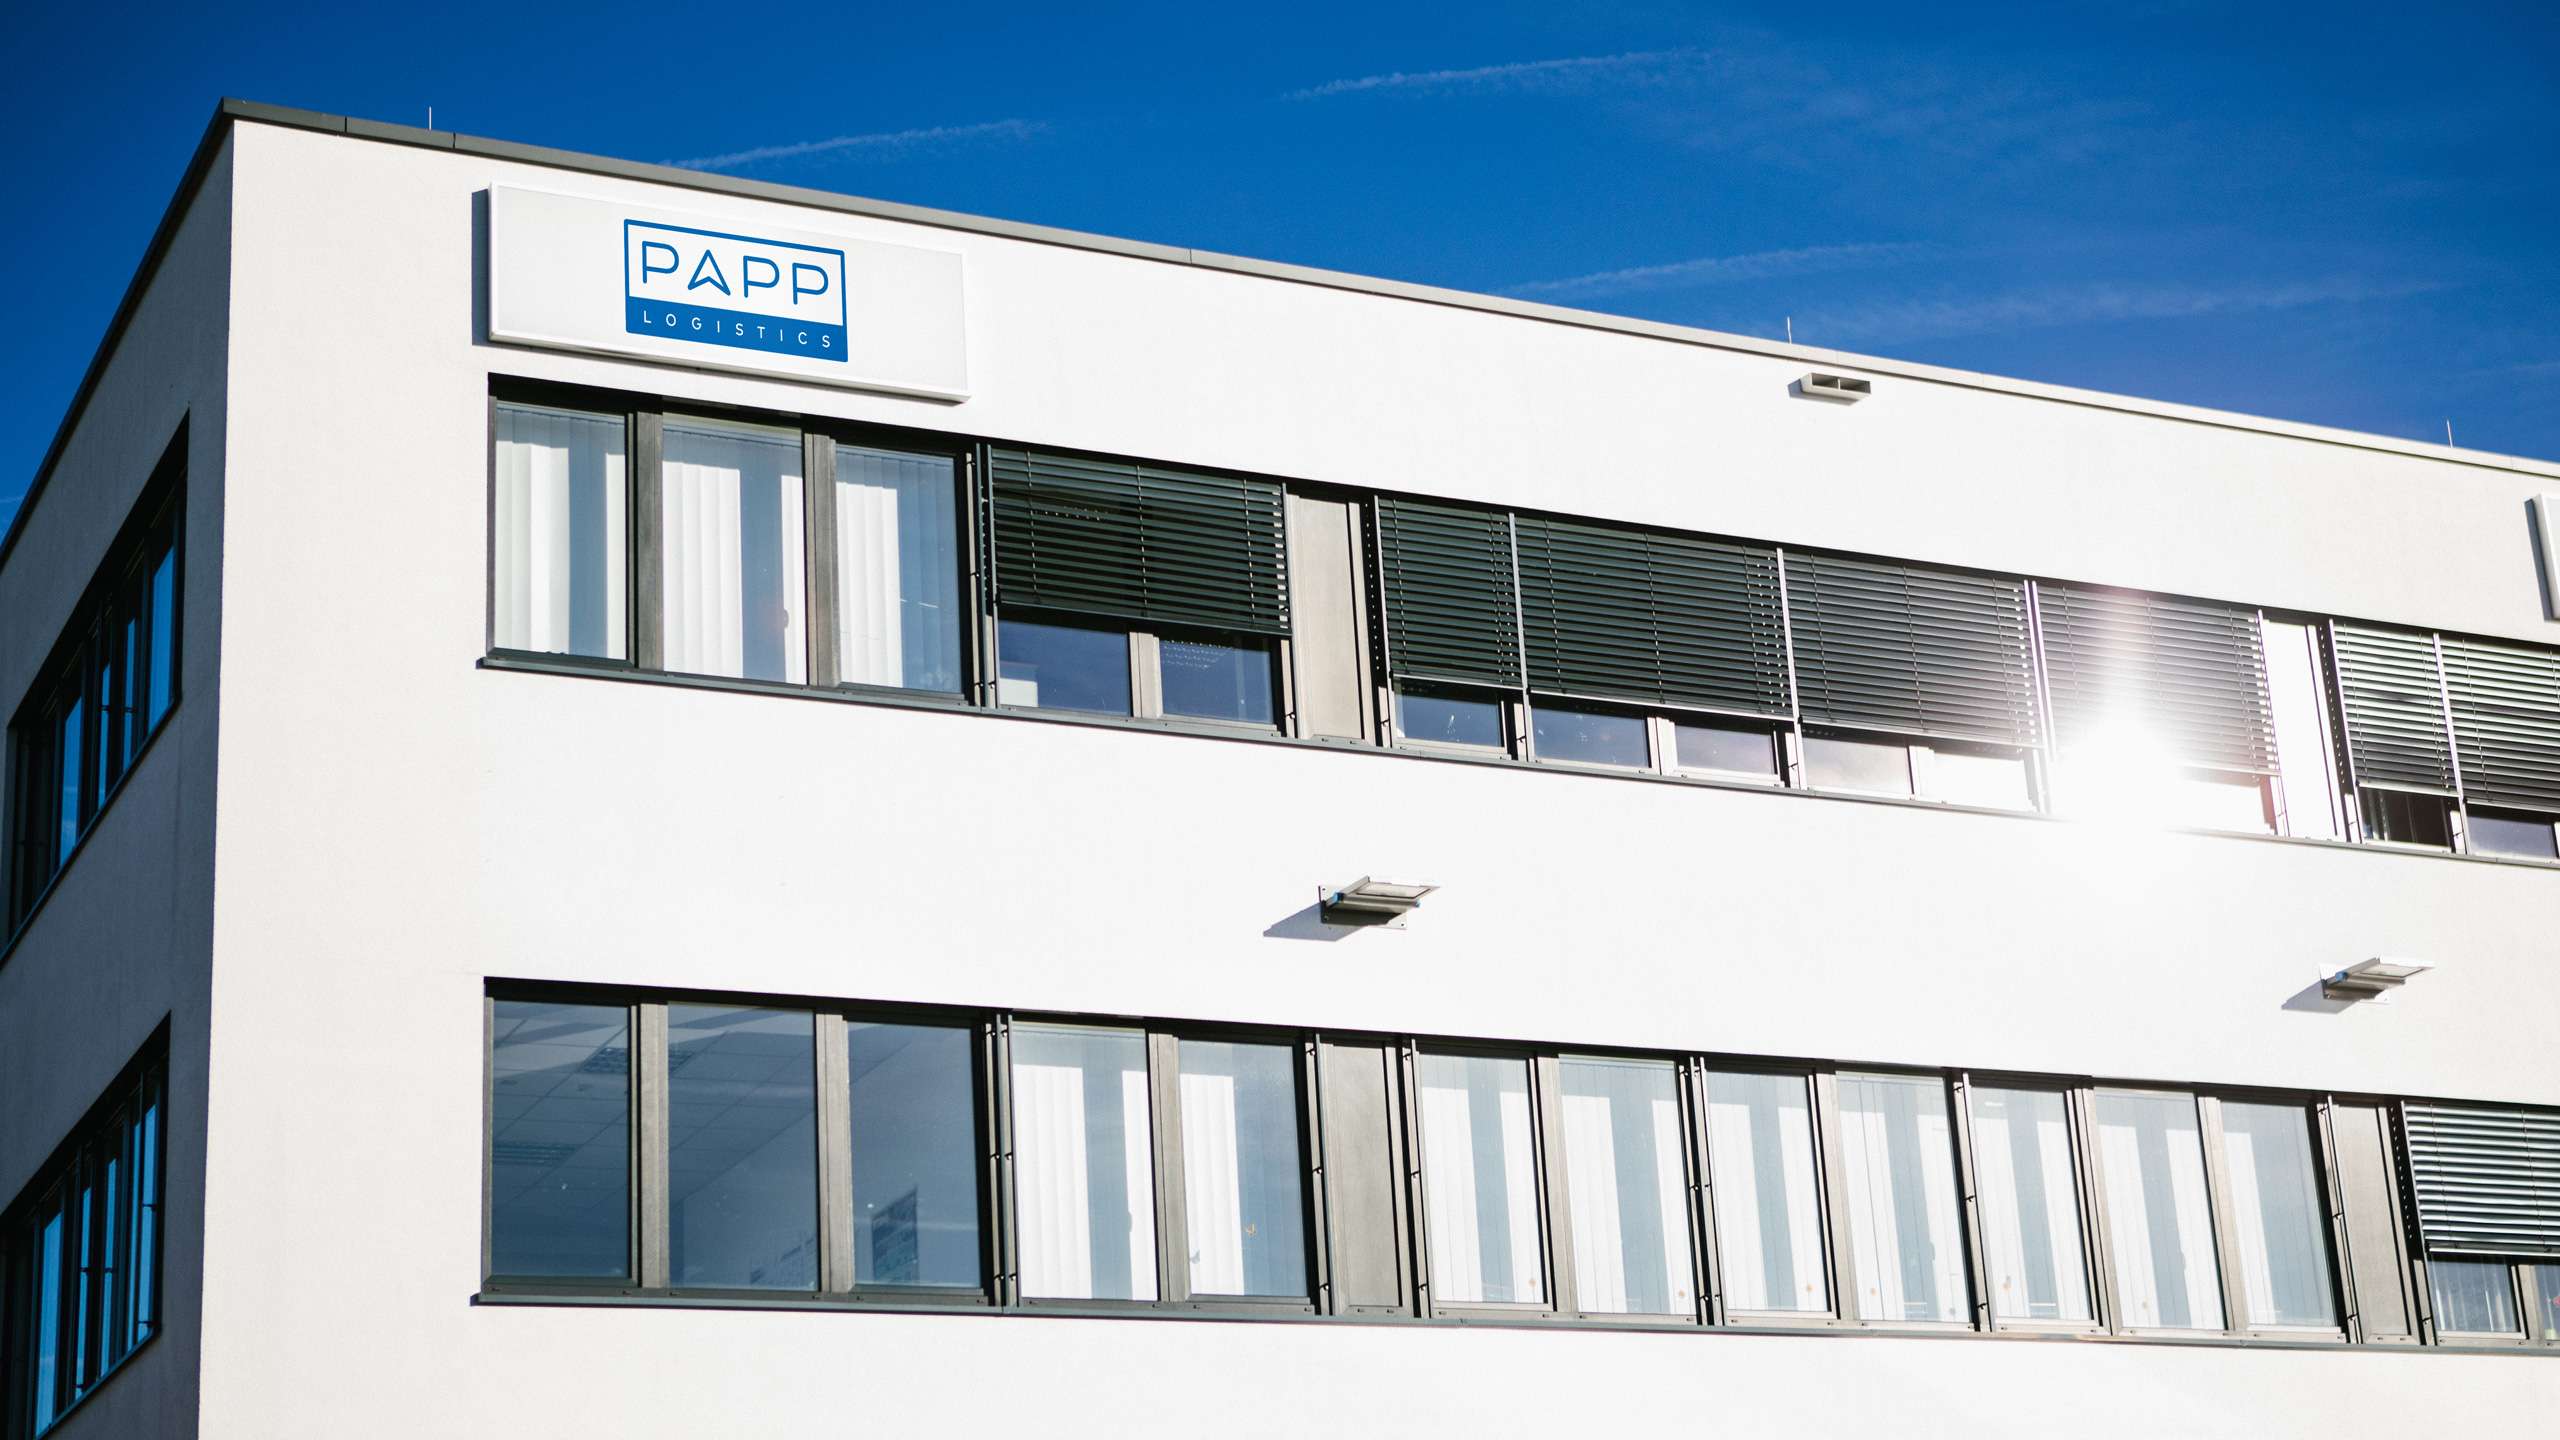 A white building against a blue, cloudless sky. The PAPP logo is in the upper left corner. Two rows of windows are bathed in sunlight.